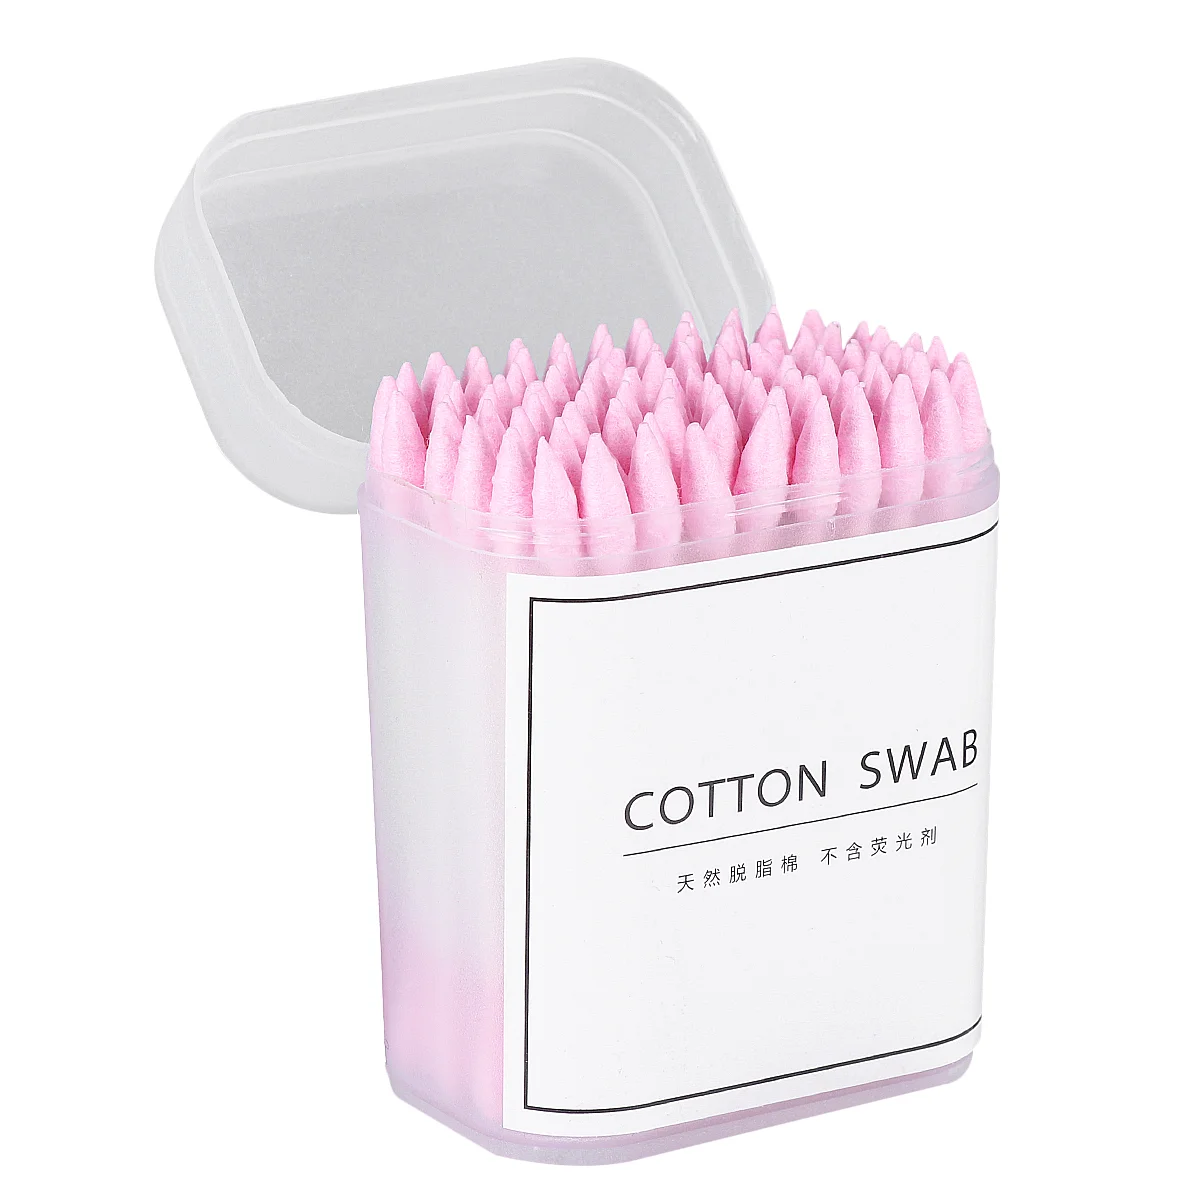 

300pcs Precision Tip Cotton Swabs Makeup Cotton Buds Cleaning Ear Double Tipped Cotton Buds for Makeup Ear Fabric